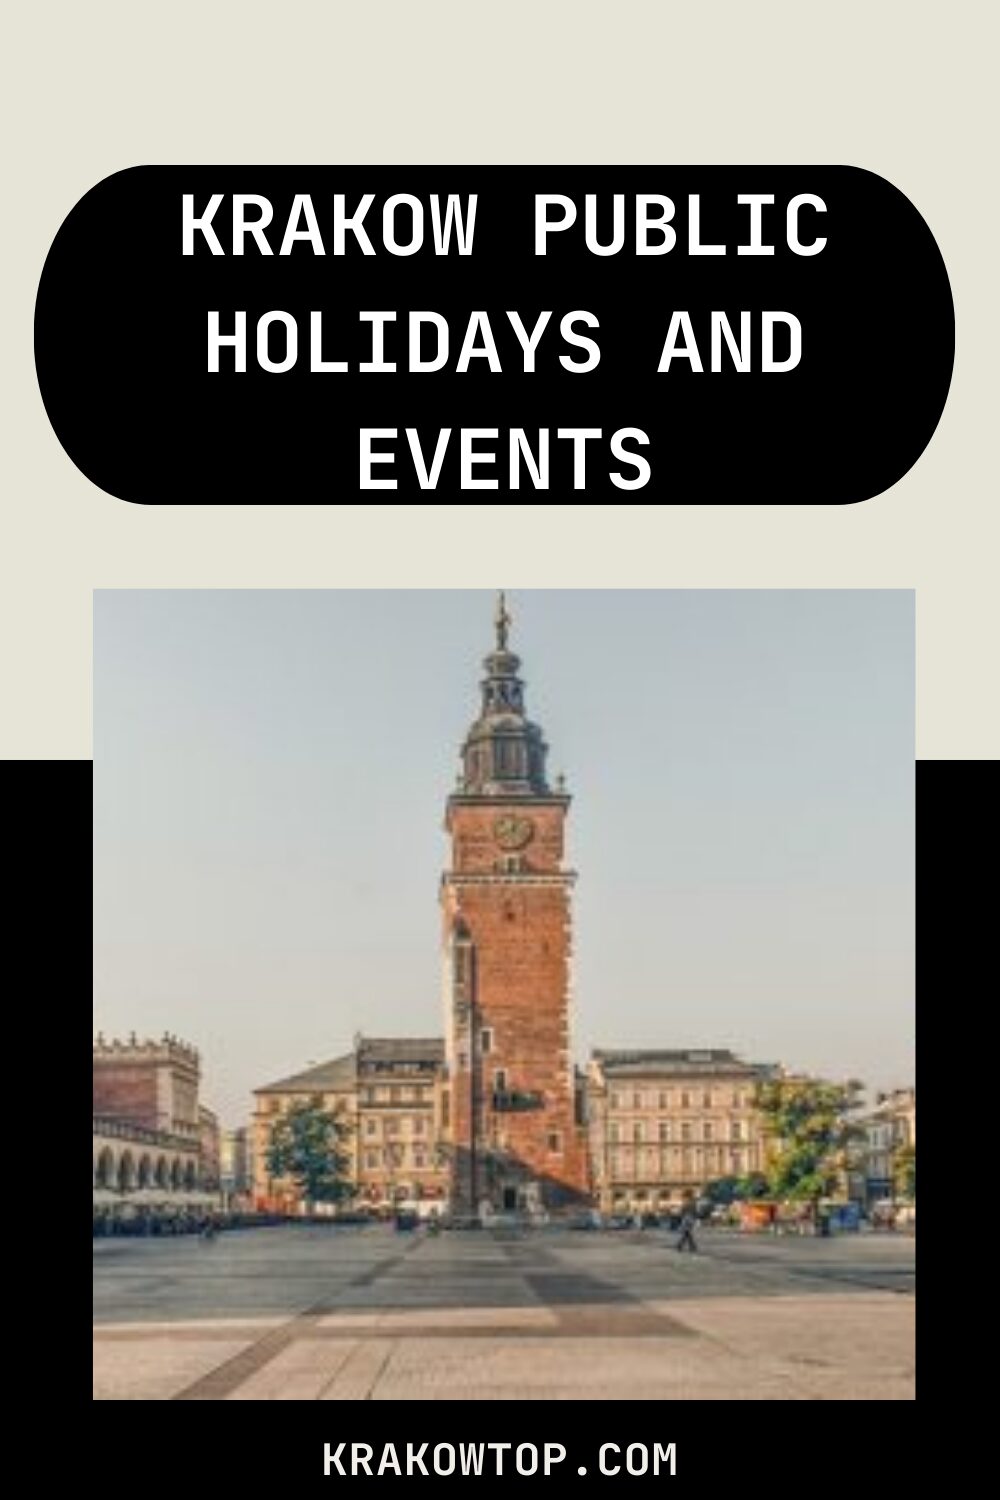 Krakow's exciting public holidays and events